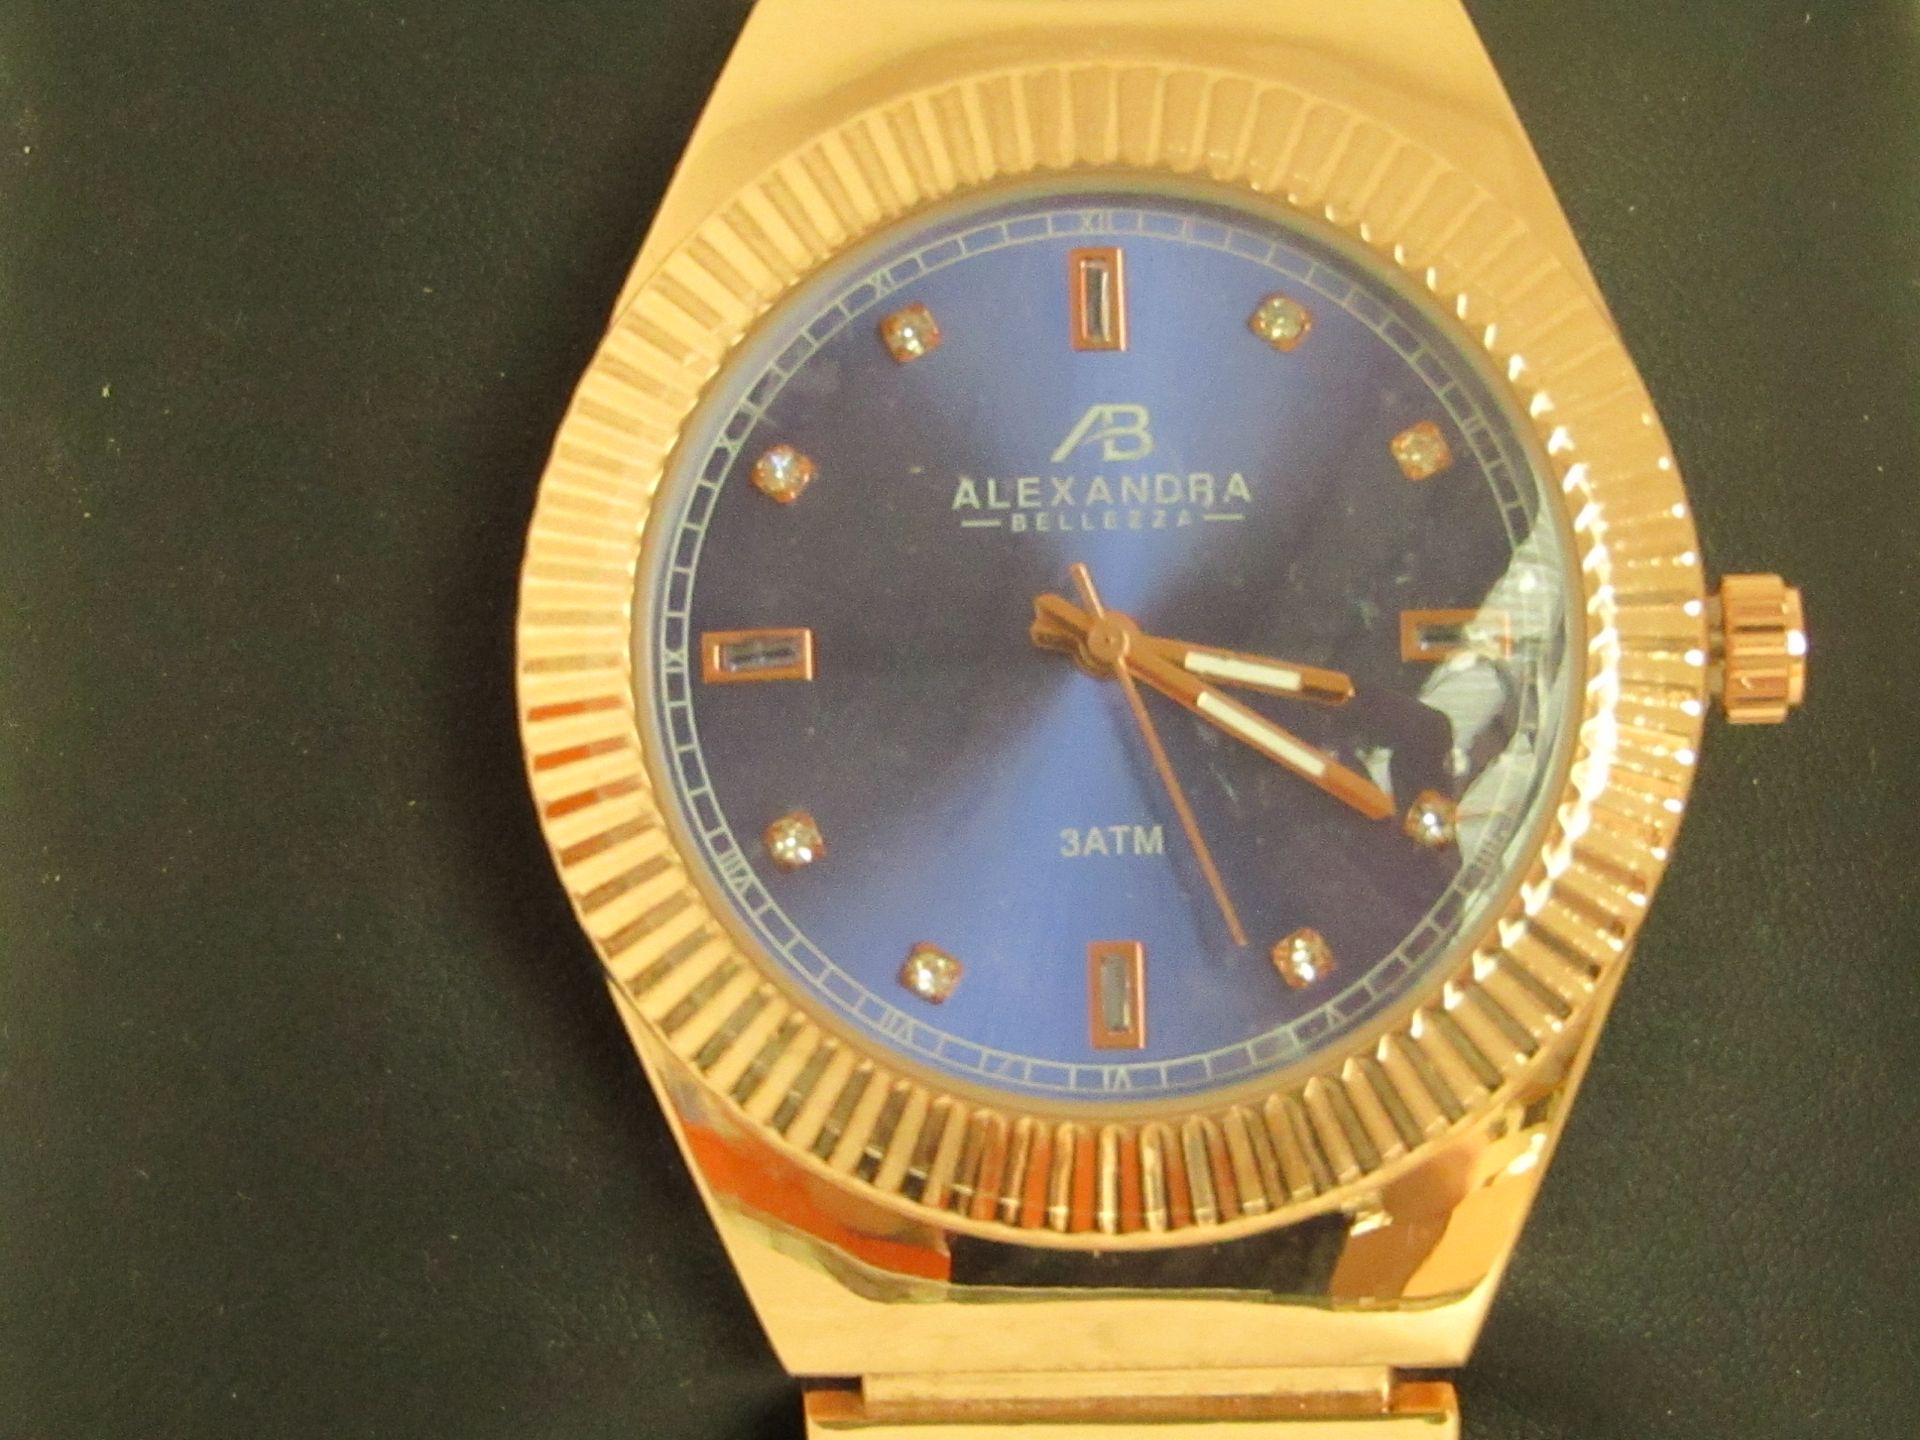 Alexandra Bellezza 3ATM Watch - Rose Gold Coloured. New with box